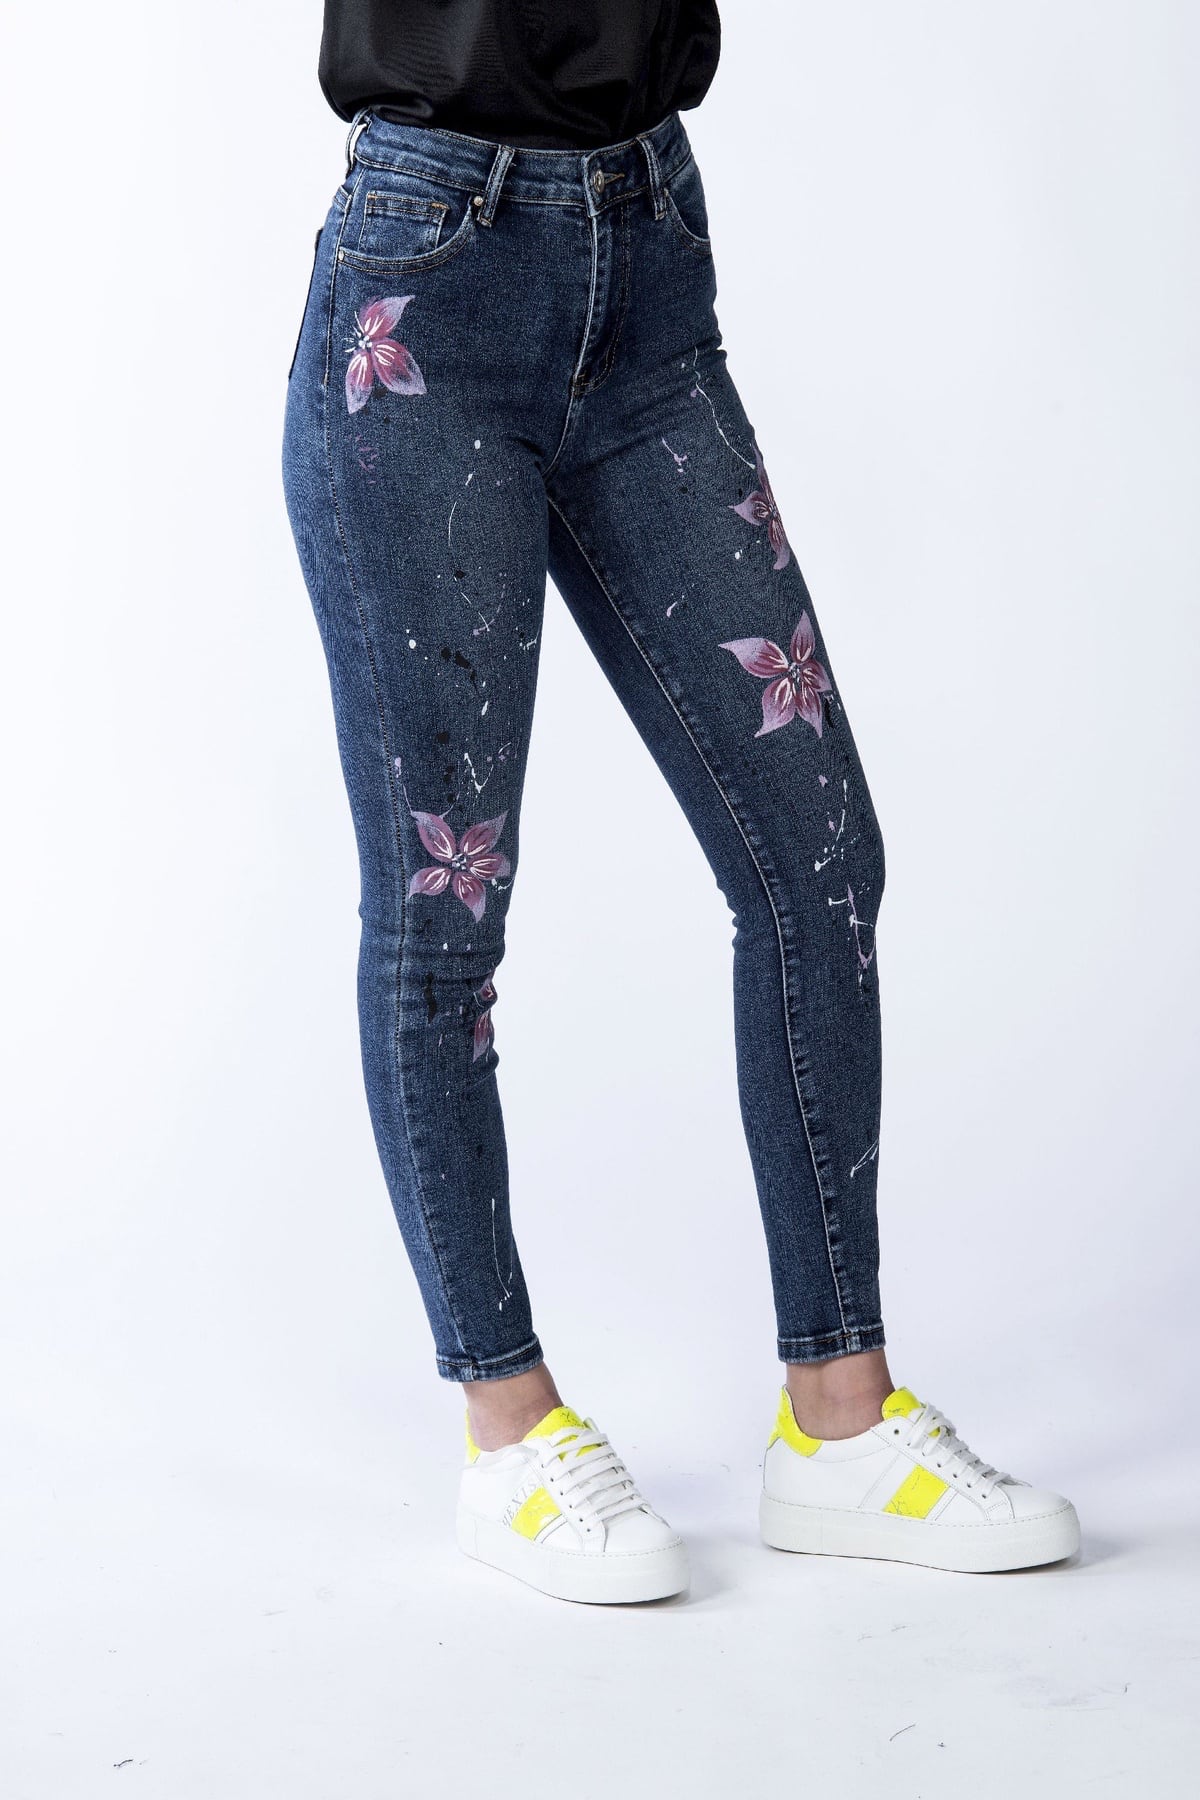 HEXIS women's jeans with flower